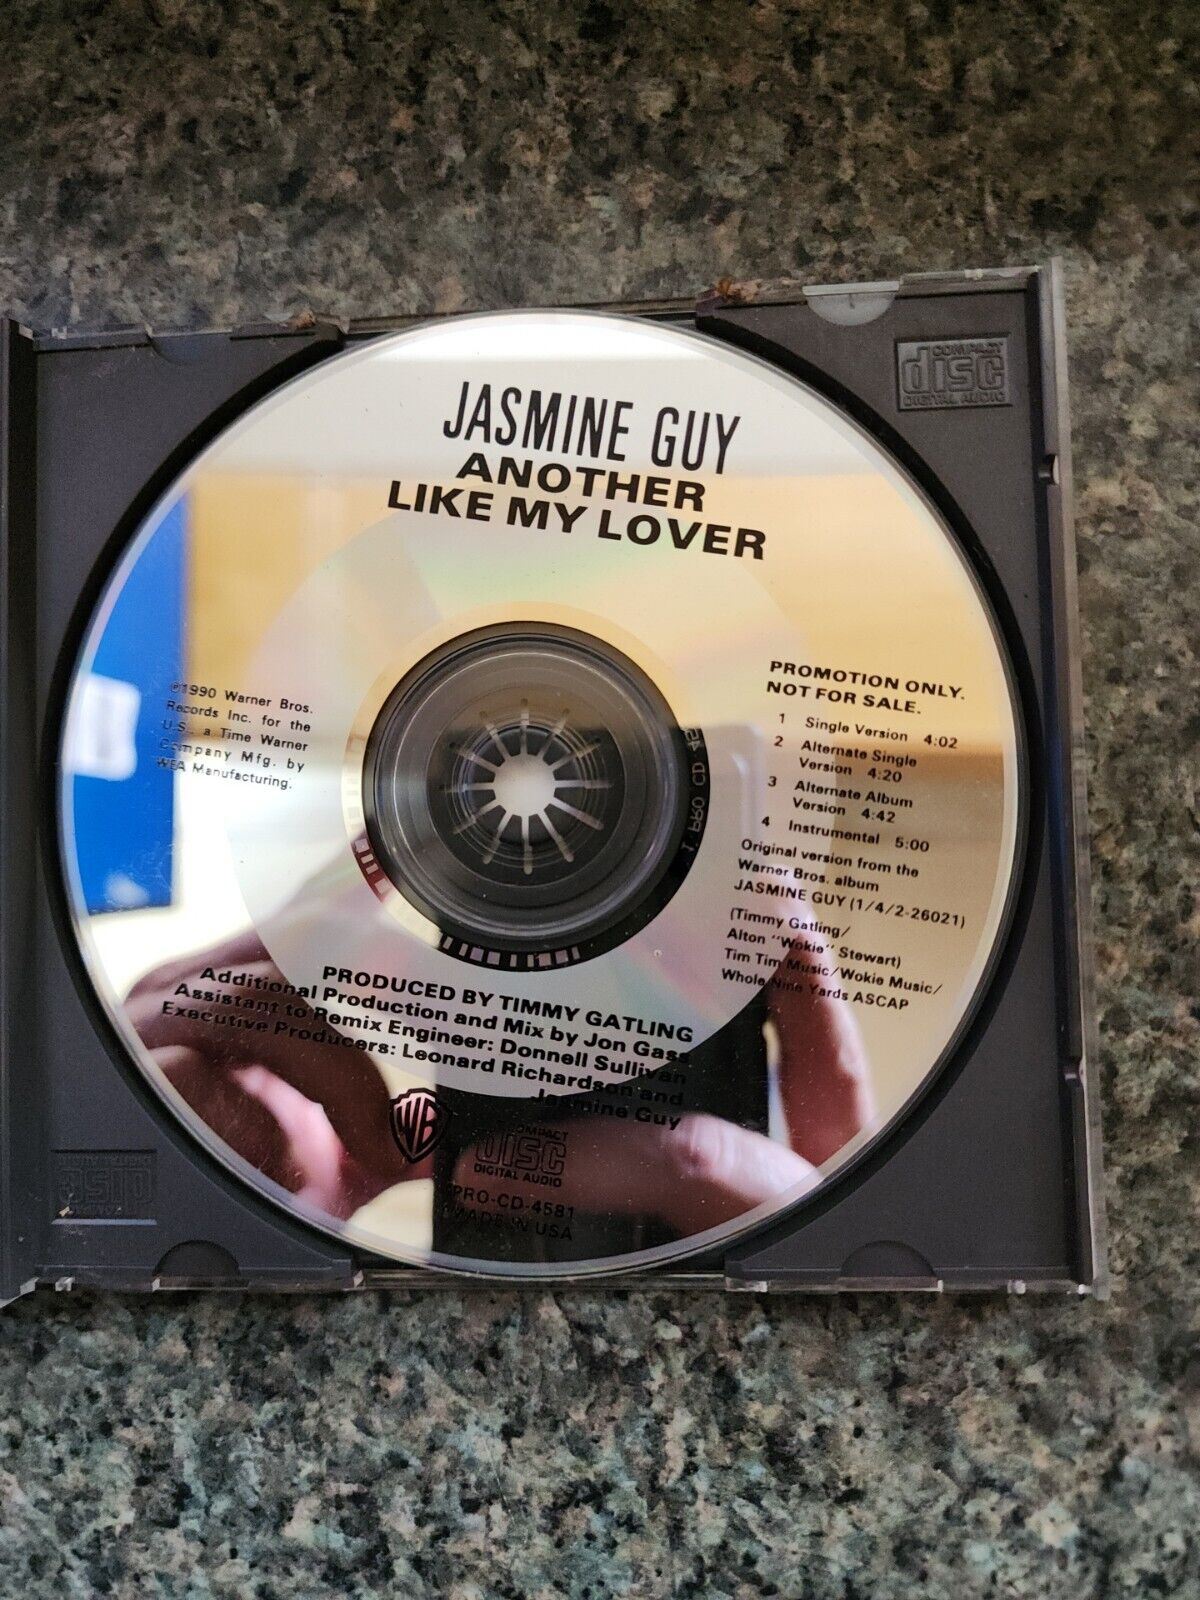 Jasmine Guy - Another like my lover- Promo CD - rare - Remix c480